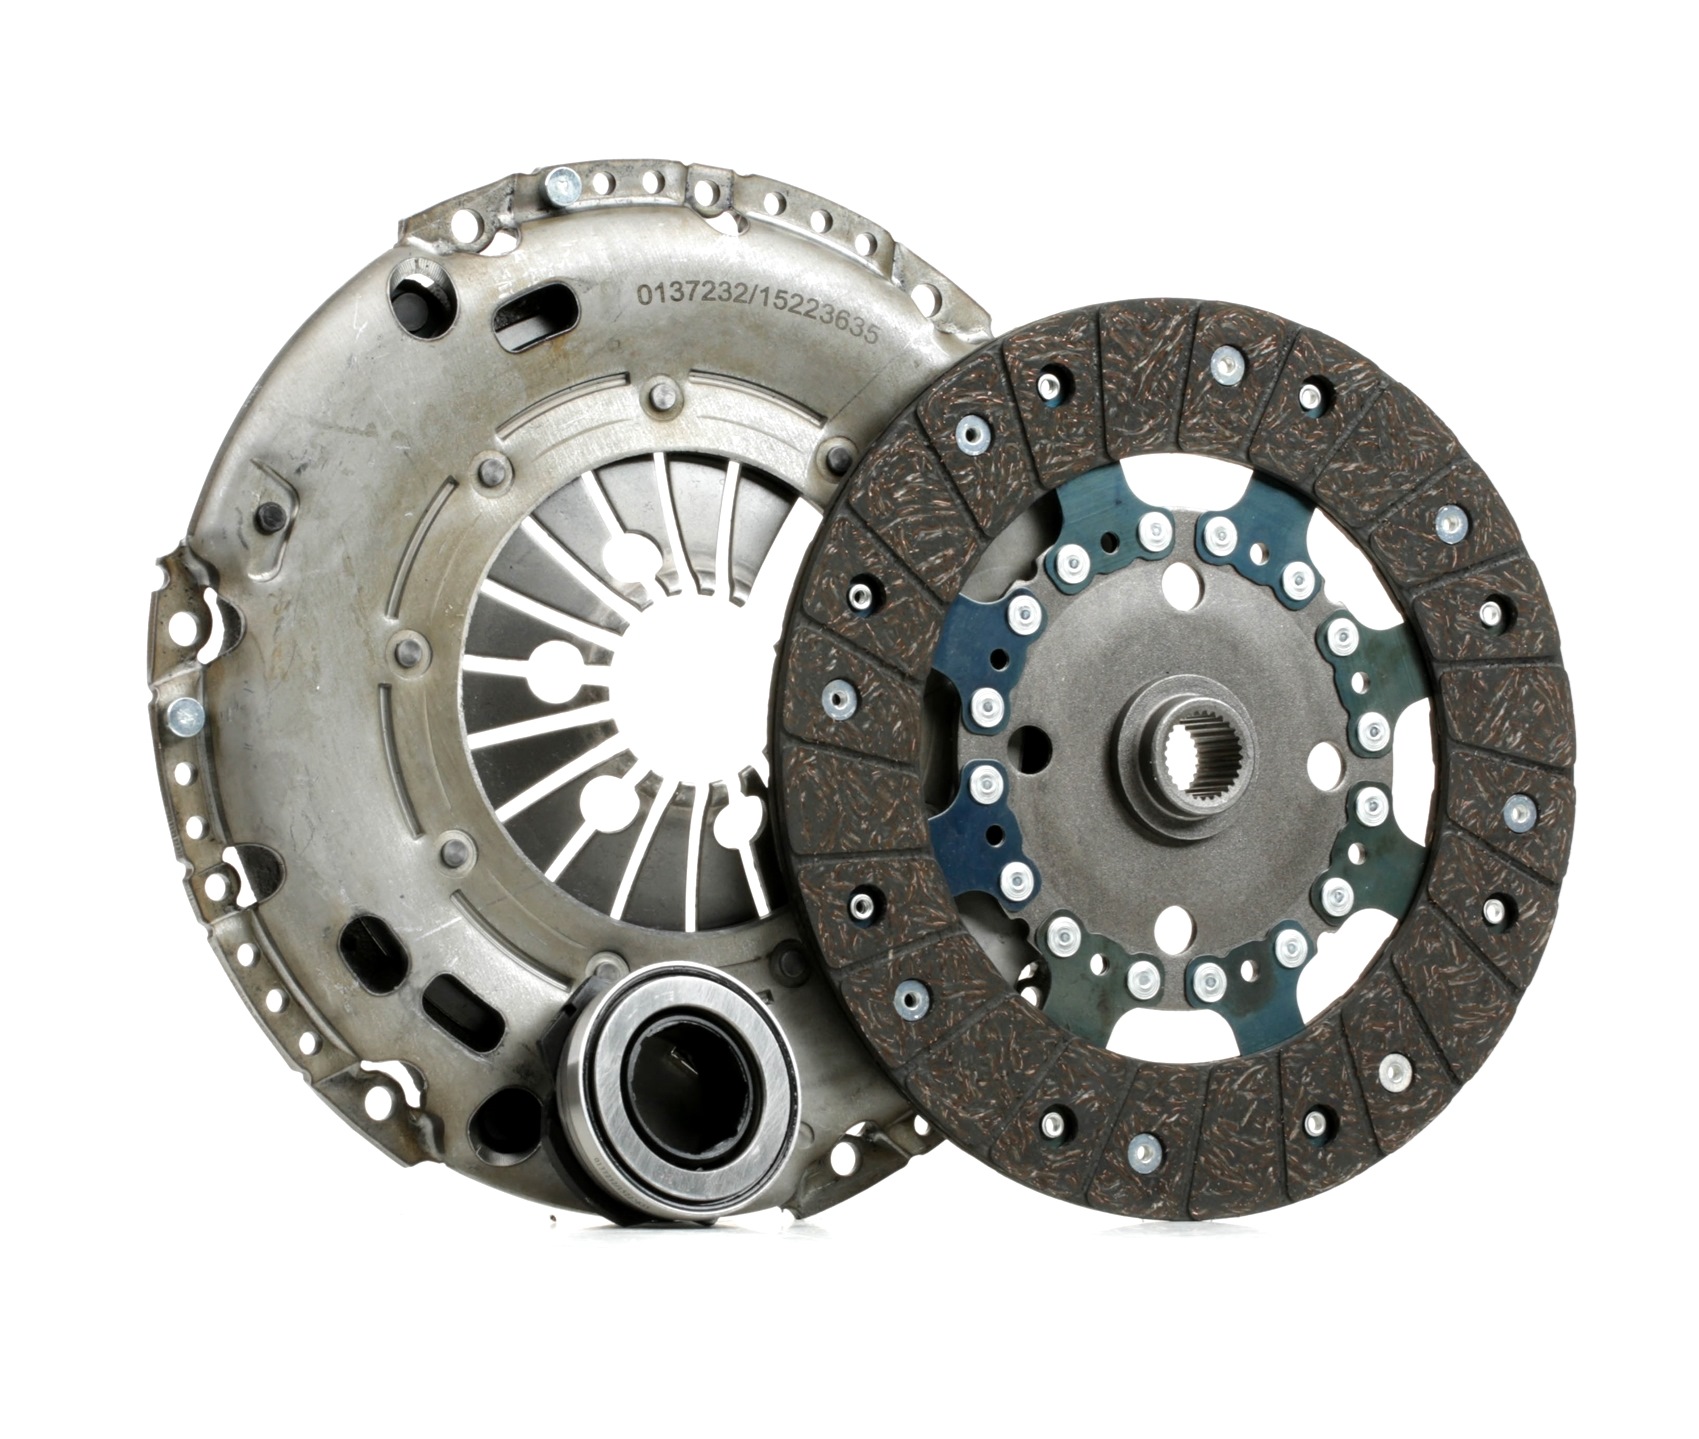 STARK SKCK-0100432 Clutch kit for engines with dual-mass flywheel, with clutch release bearing, with clutch disc, Check and replace dual-mass flywheel if necessary., 230mm